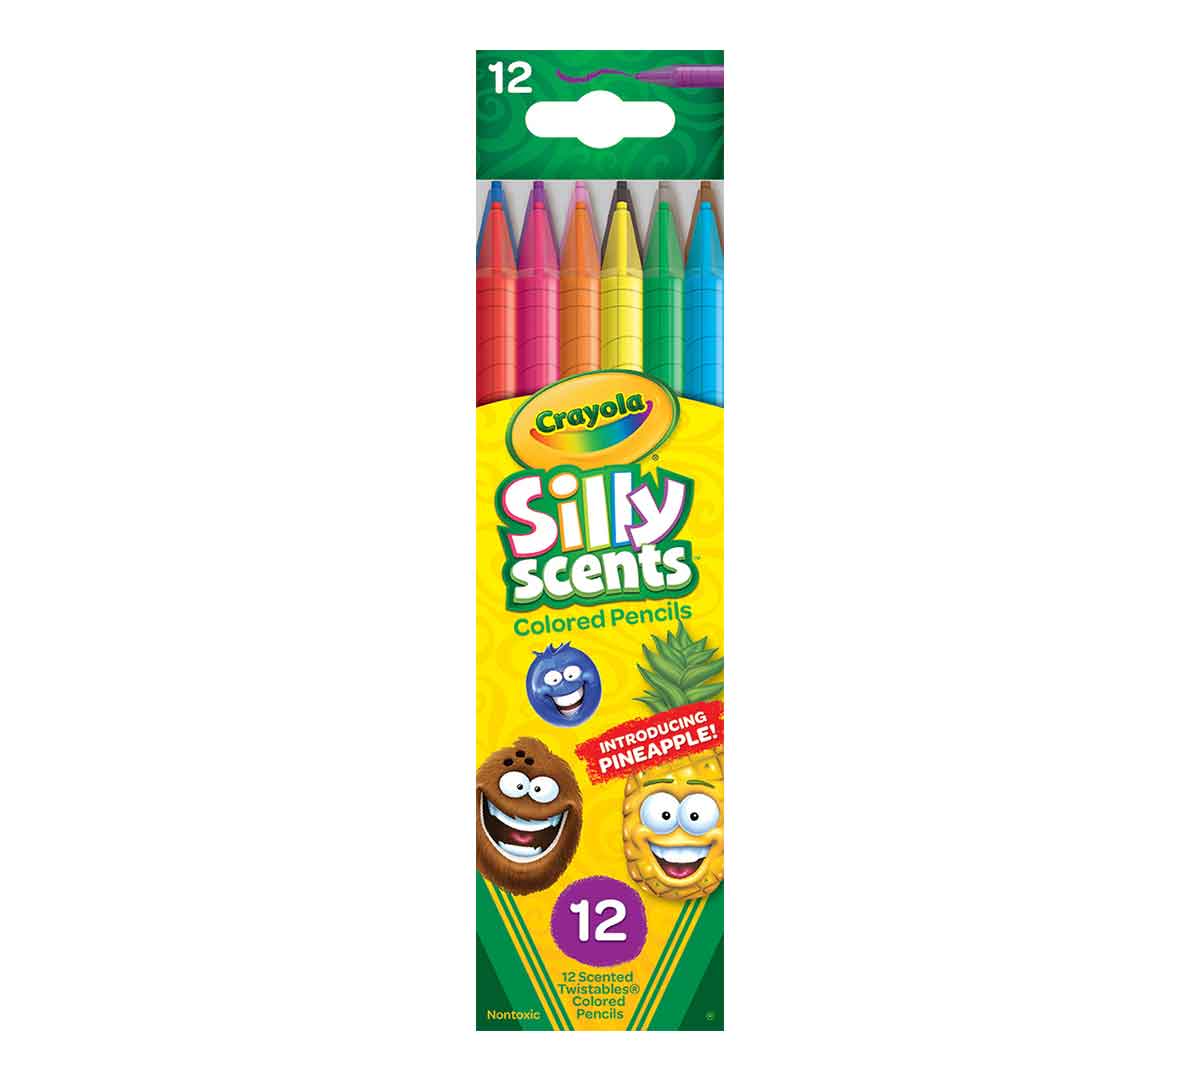 https://shop.crayola.com/on/demandware.static/-/Sites-crayola-storefront/default/dwcc2afdec/images/68-7402-0-202_12ct_Silly-Scents_Twistables_Colored-Pencils_F-R.jpg